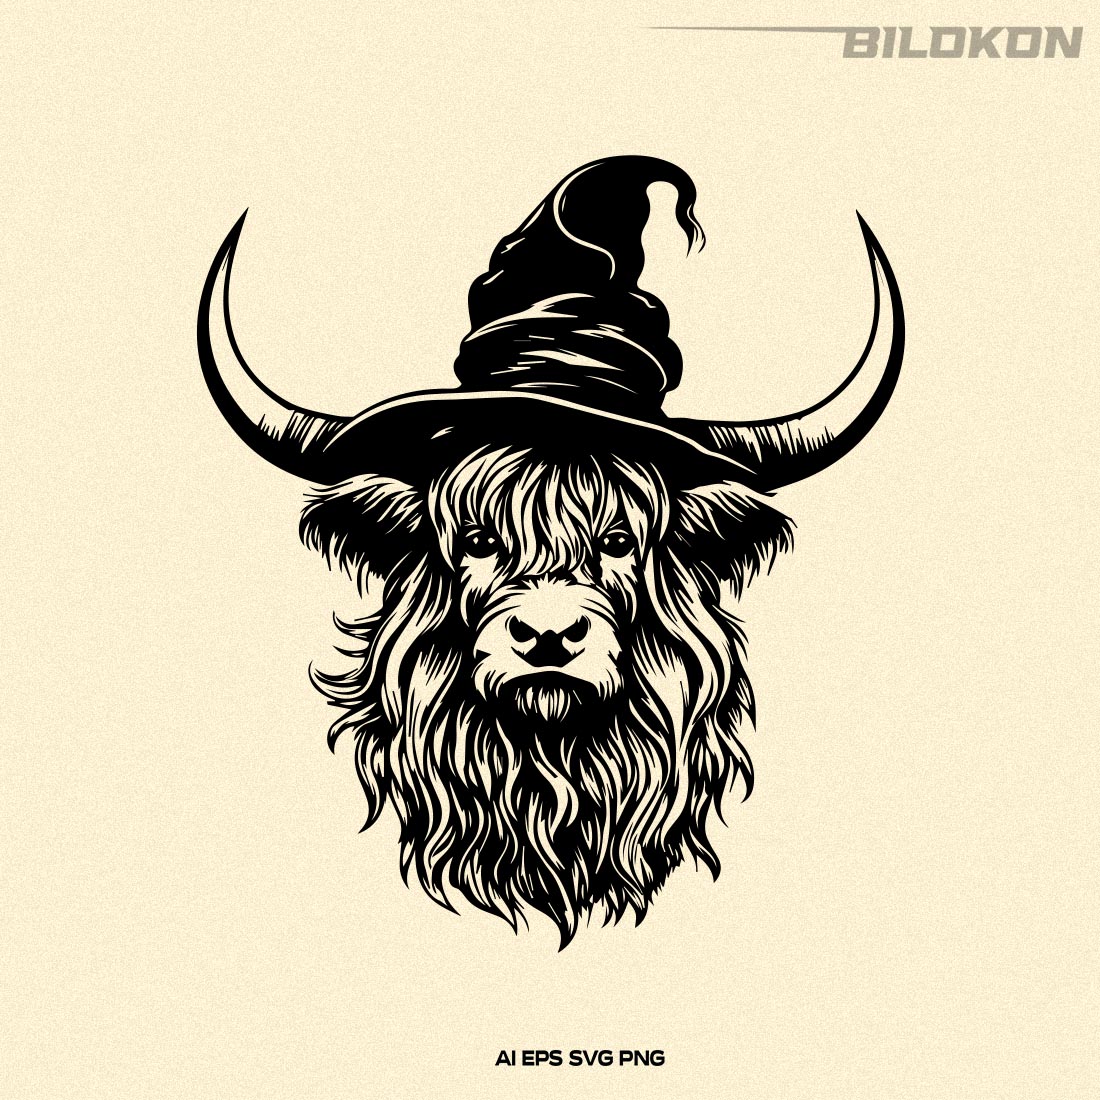 Halloween Highland Cow in a witch hat, Halloween SVG preview image.